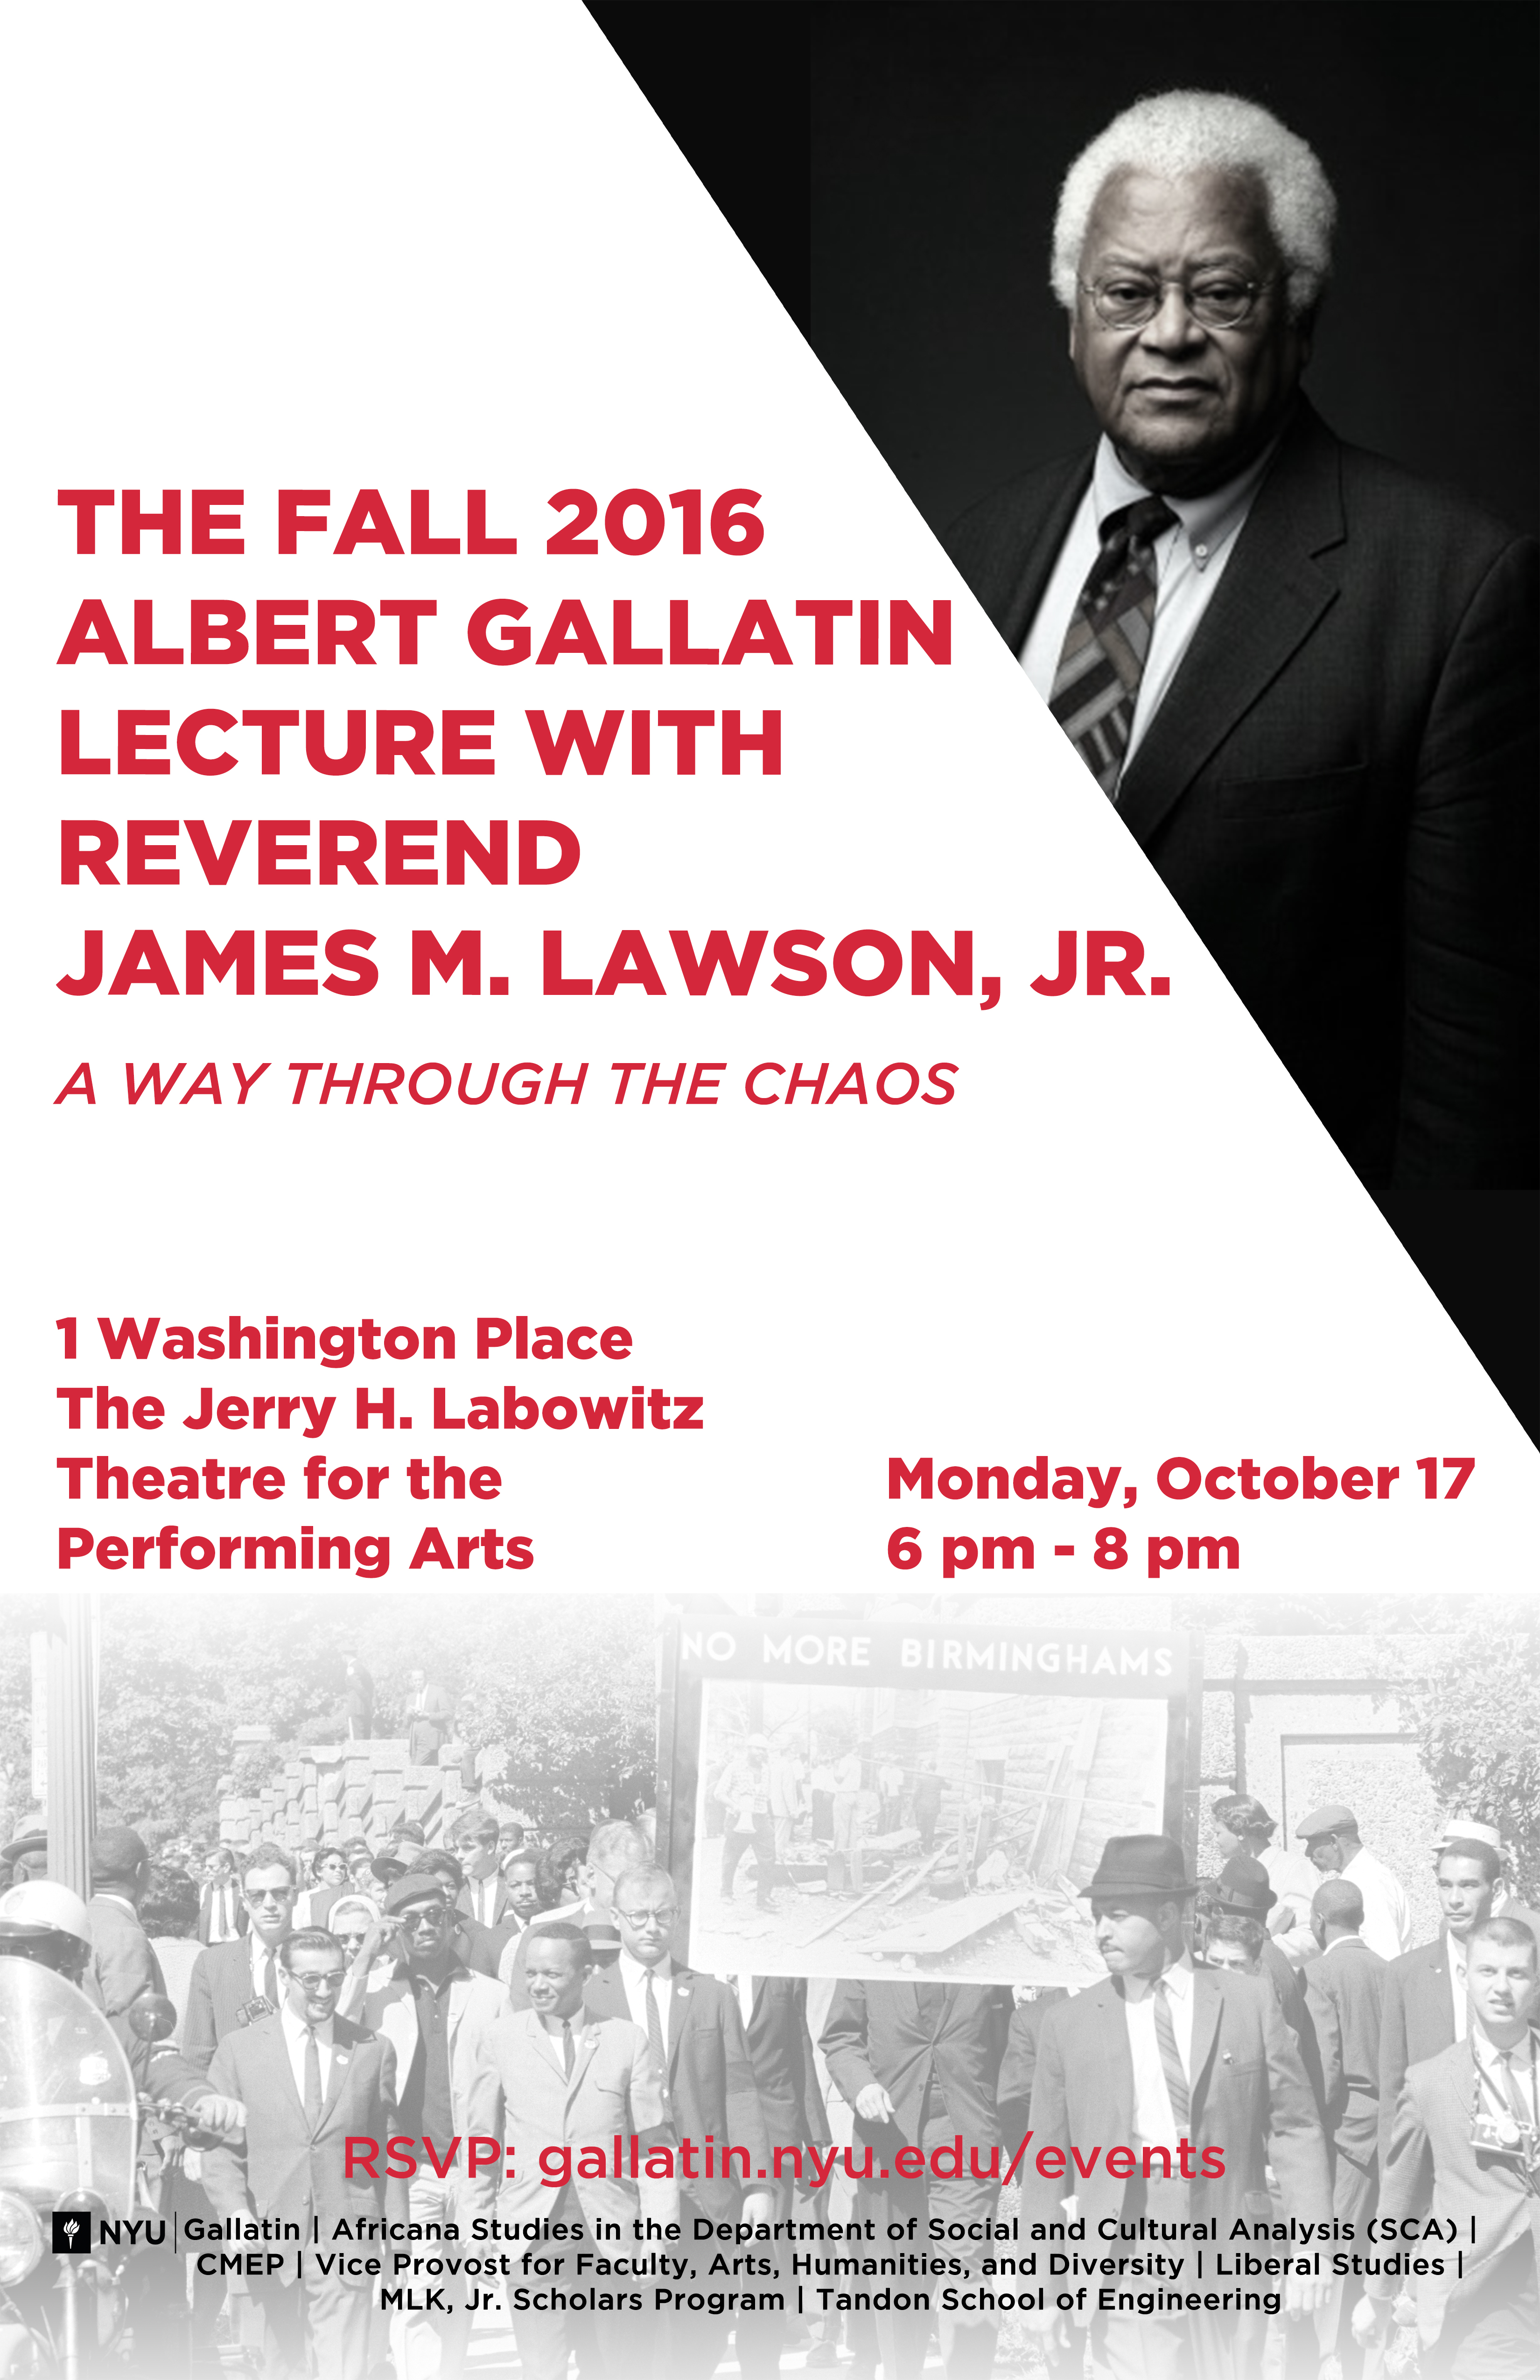 Event advertisement for the fall 2016 Albert Gallatin Lecture with Rev. James M. Lawson, Jr.